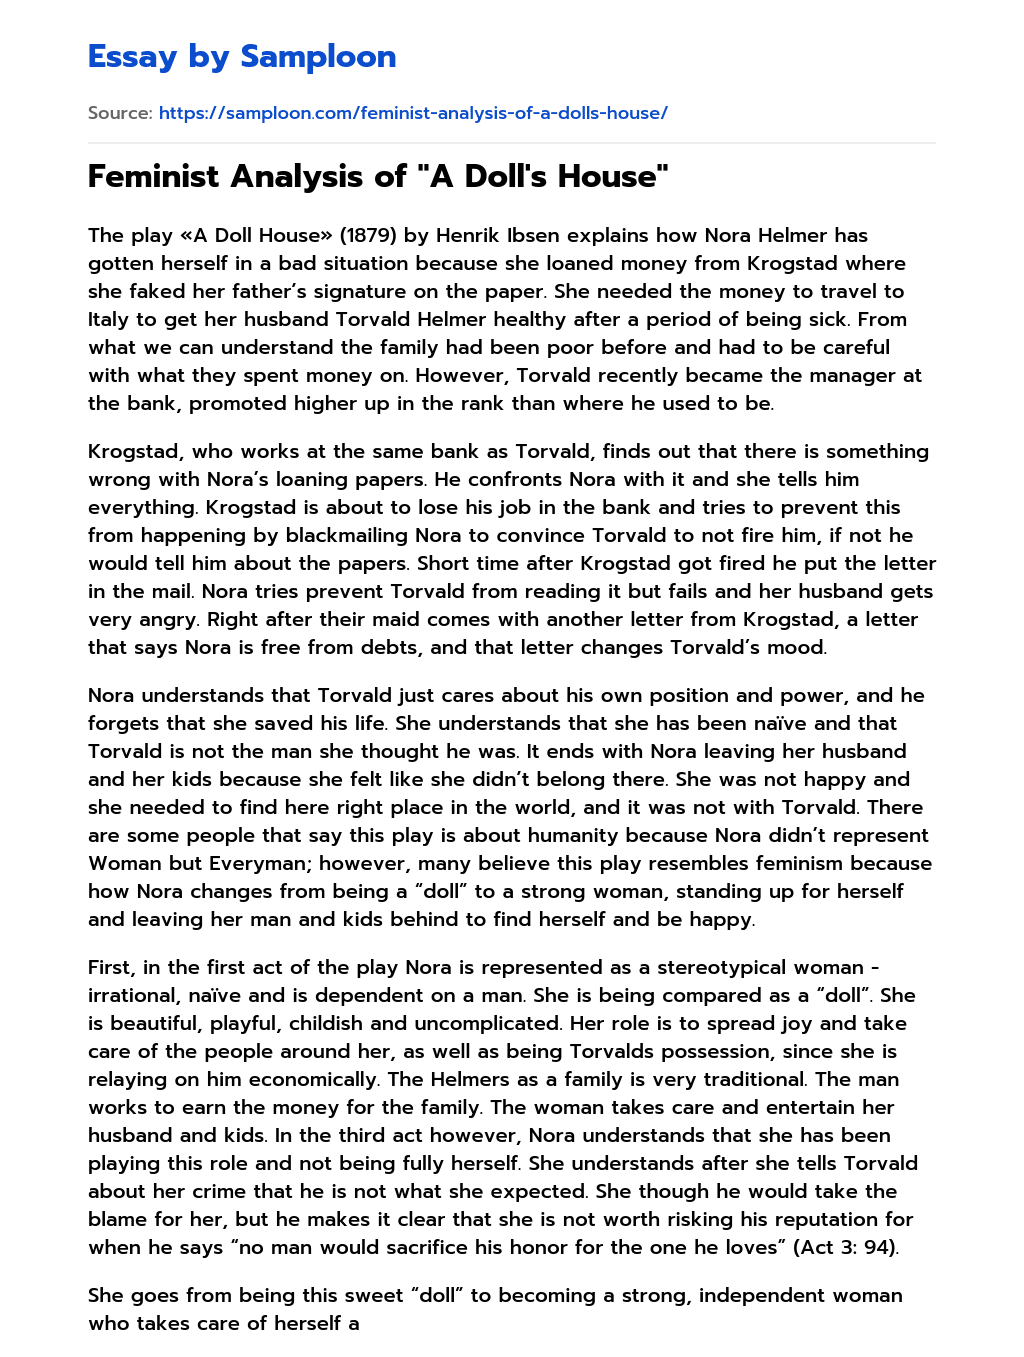 a doll's house essay example